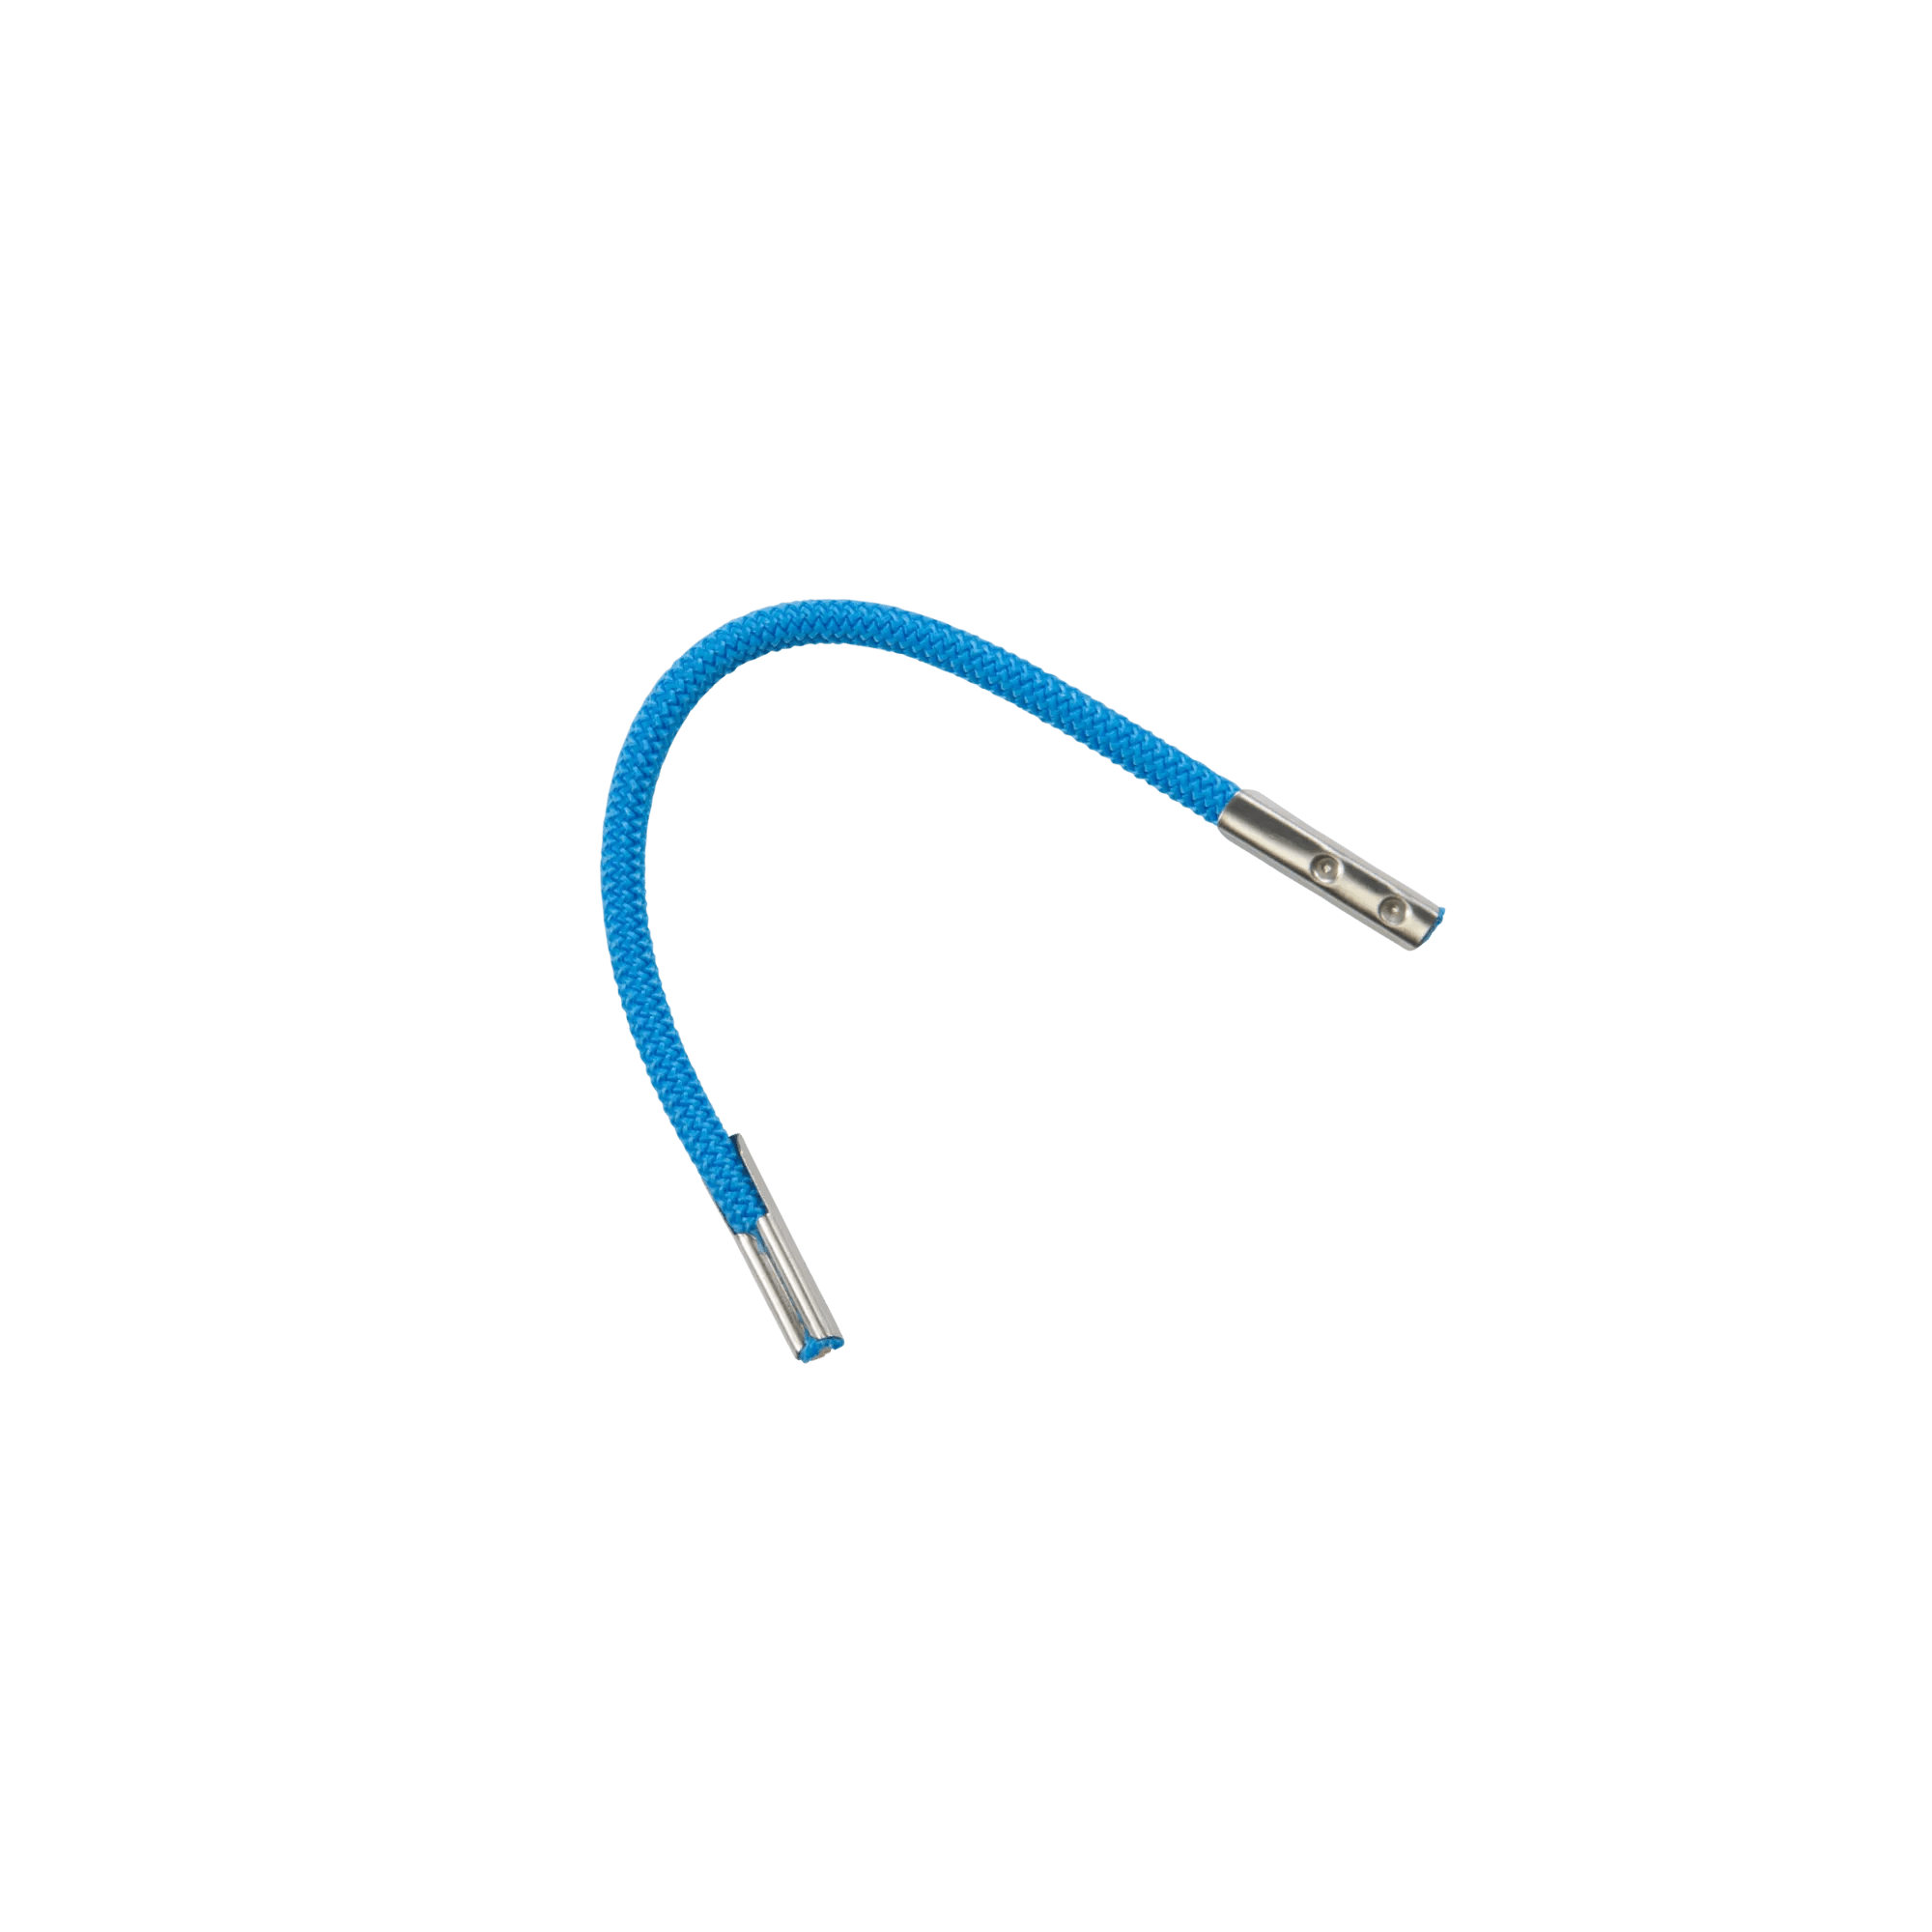 PELICAN - Electric Blue 8" (20.3 cm) Dashboard Bungee Cord -  - PS1581 - ISO